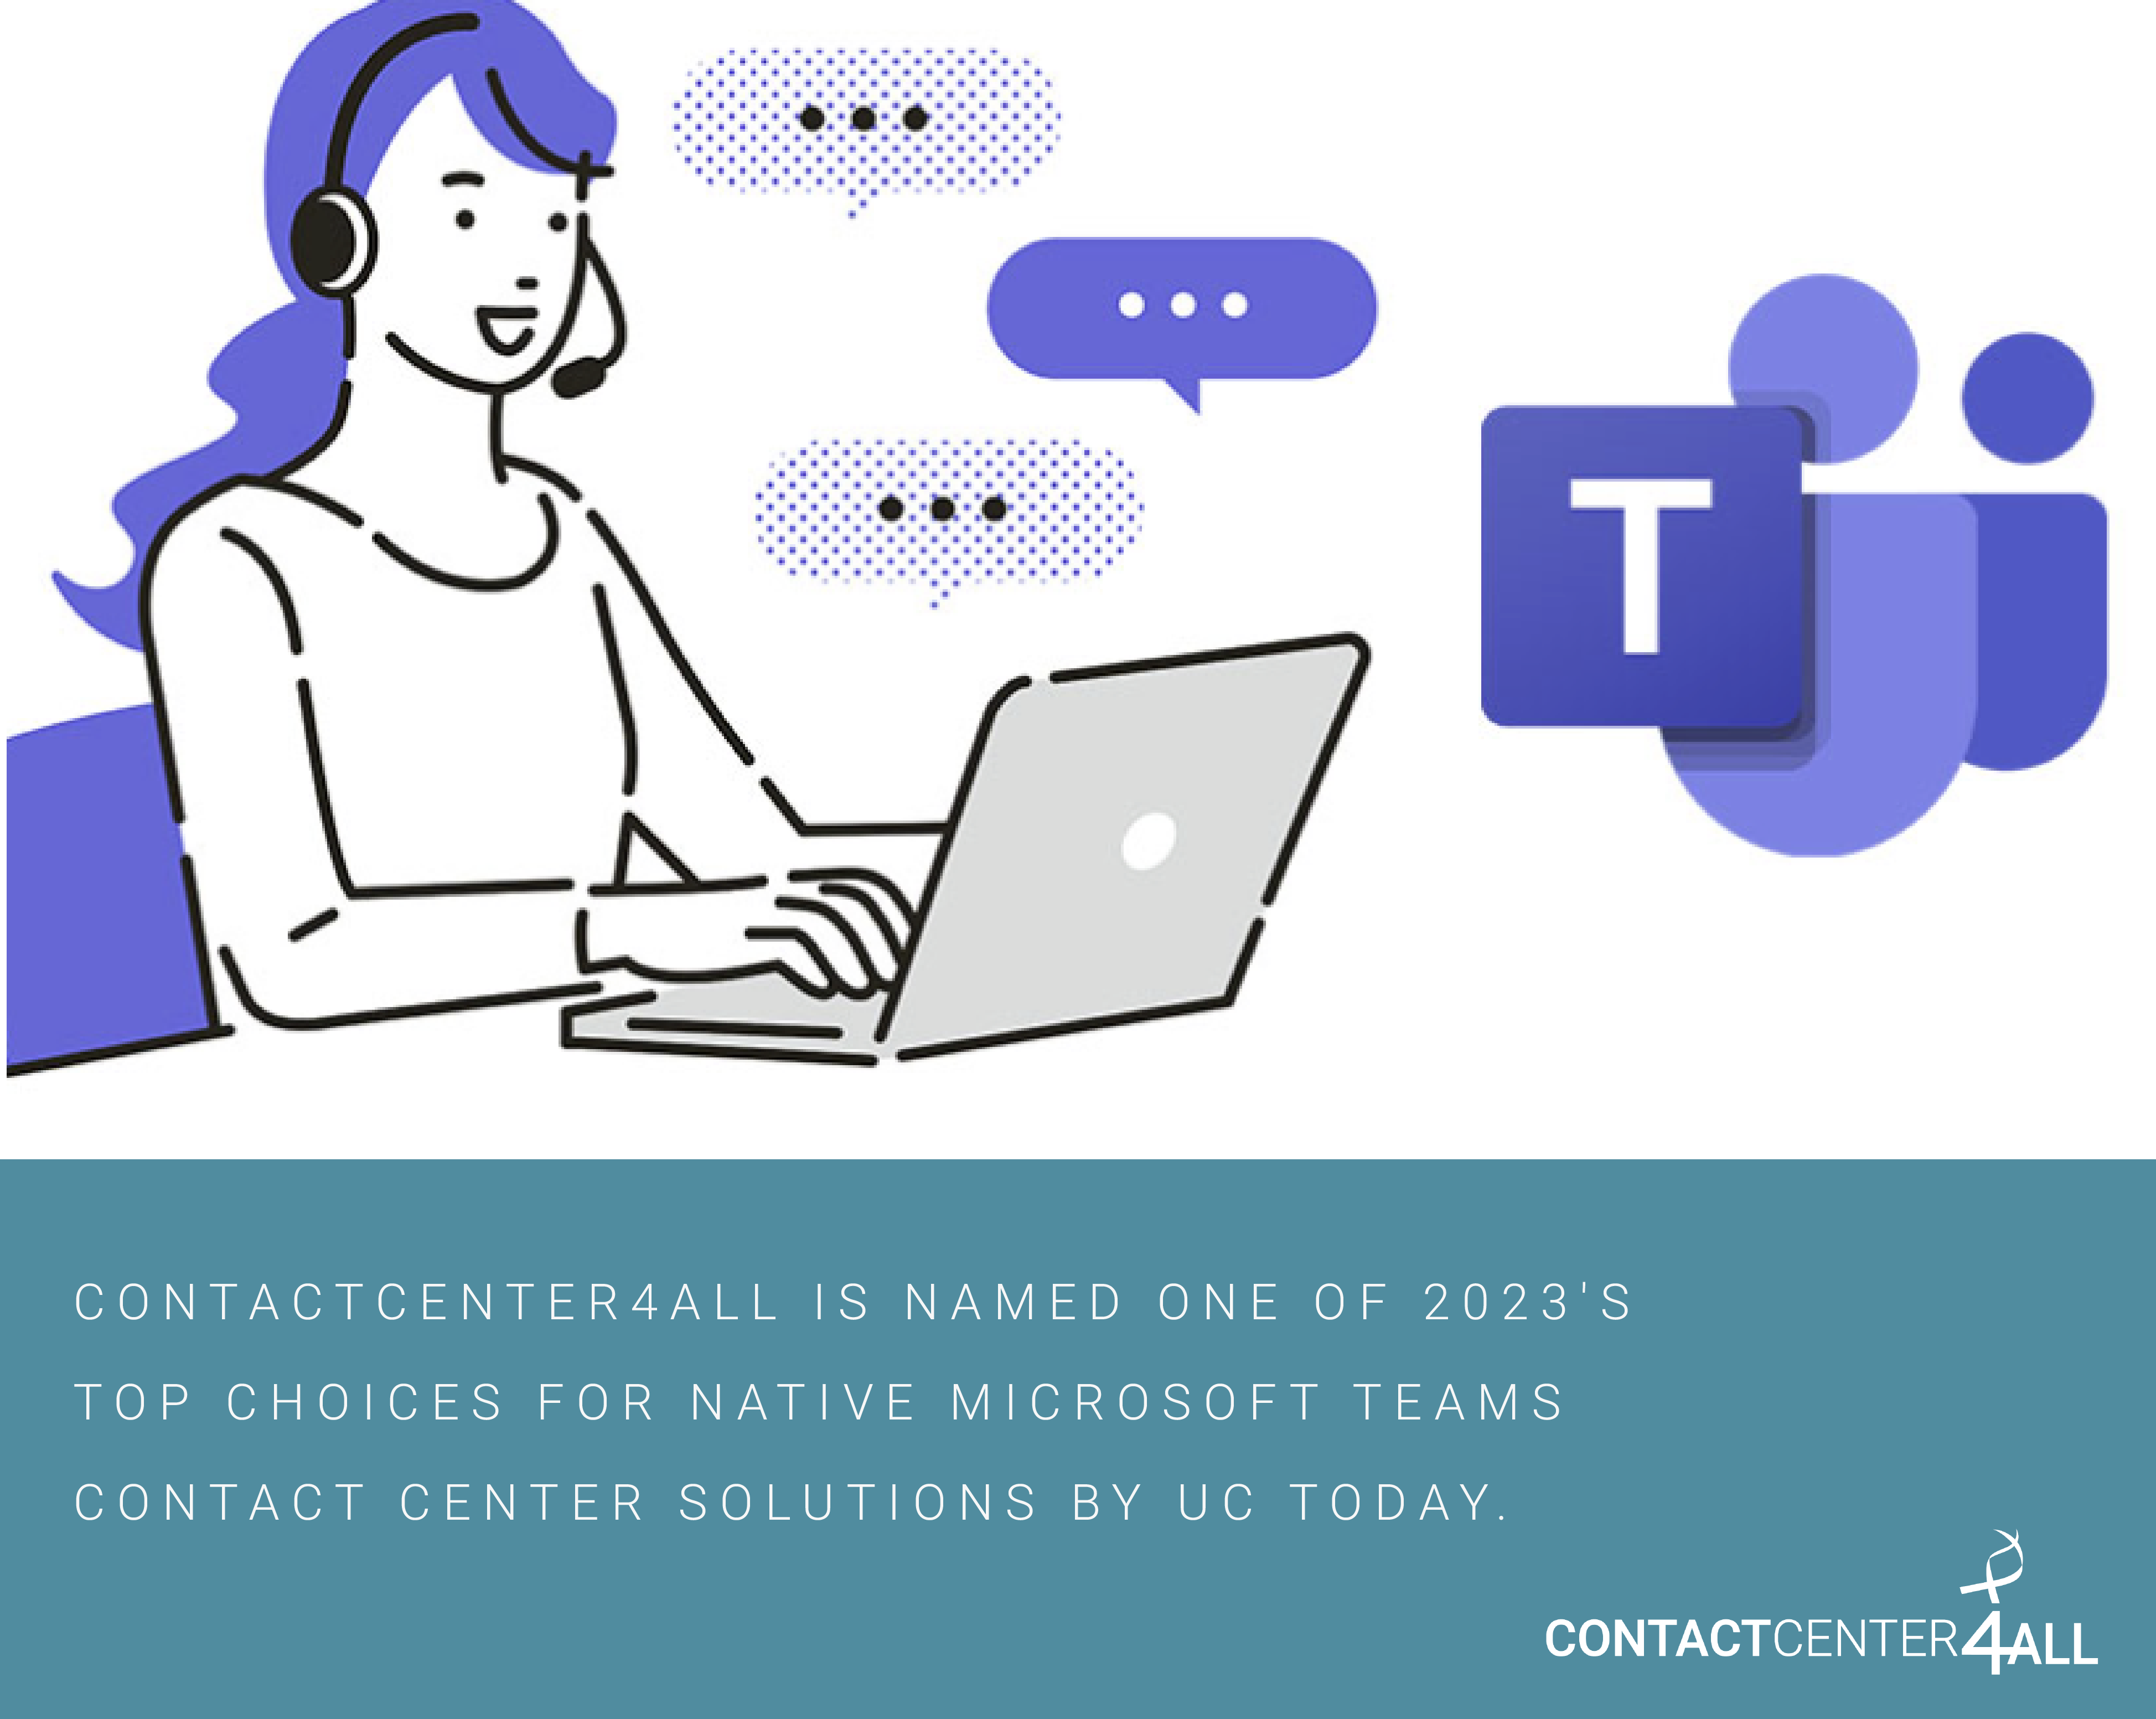 CONTACTCENTER4ALL is named one of 2023's top choices for native Microsoft Teams Contact Center solutions by UC Today.